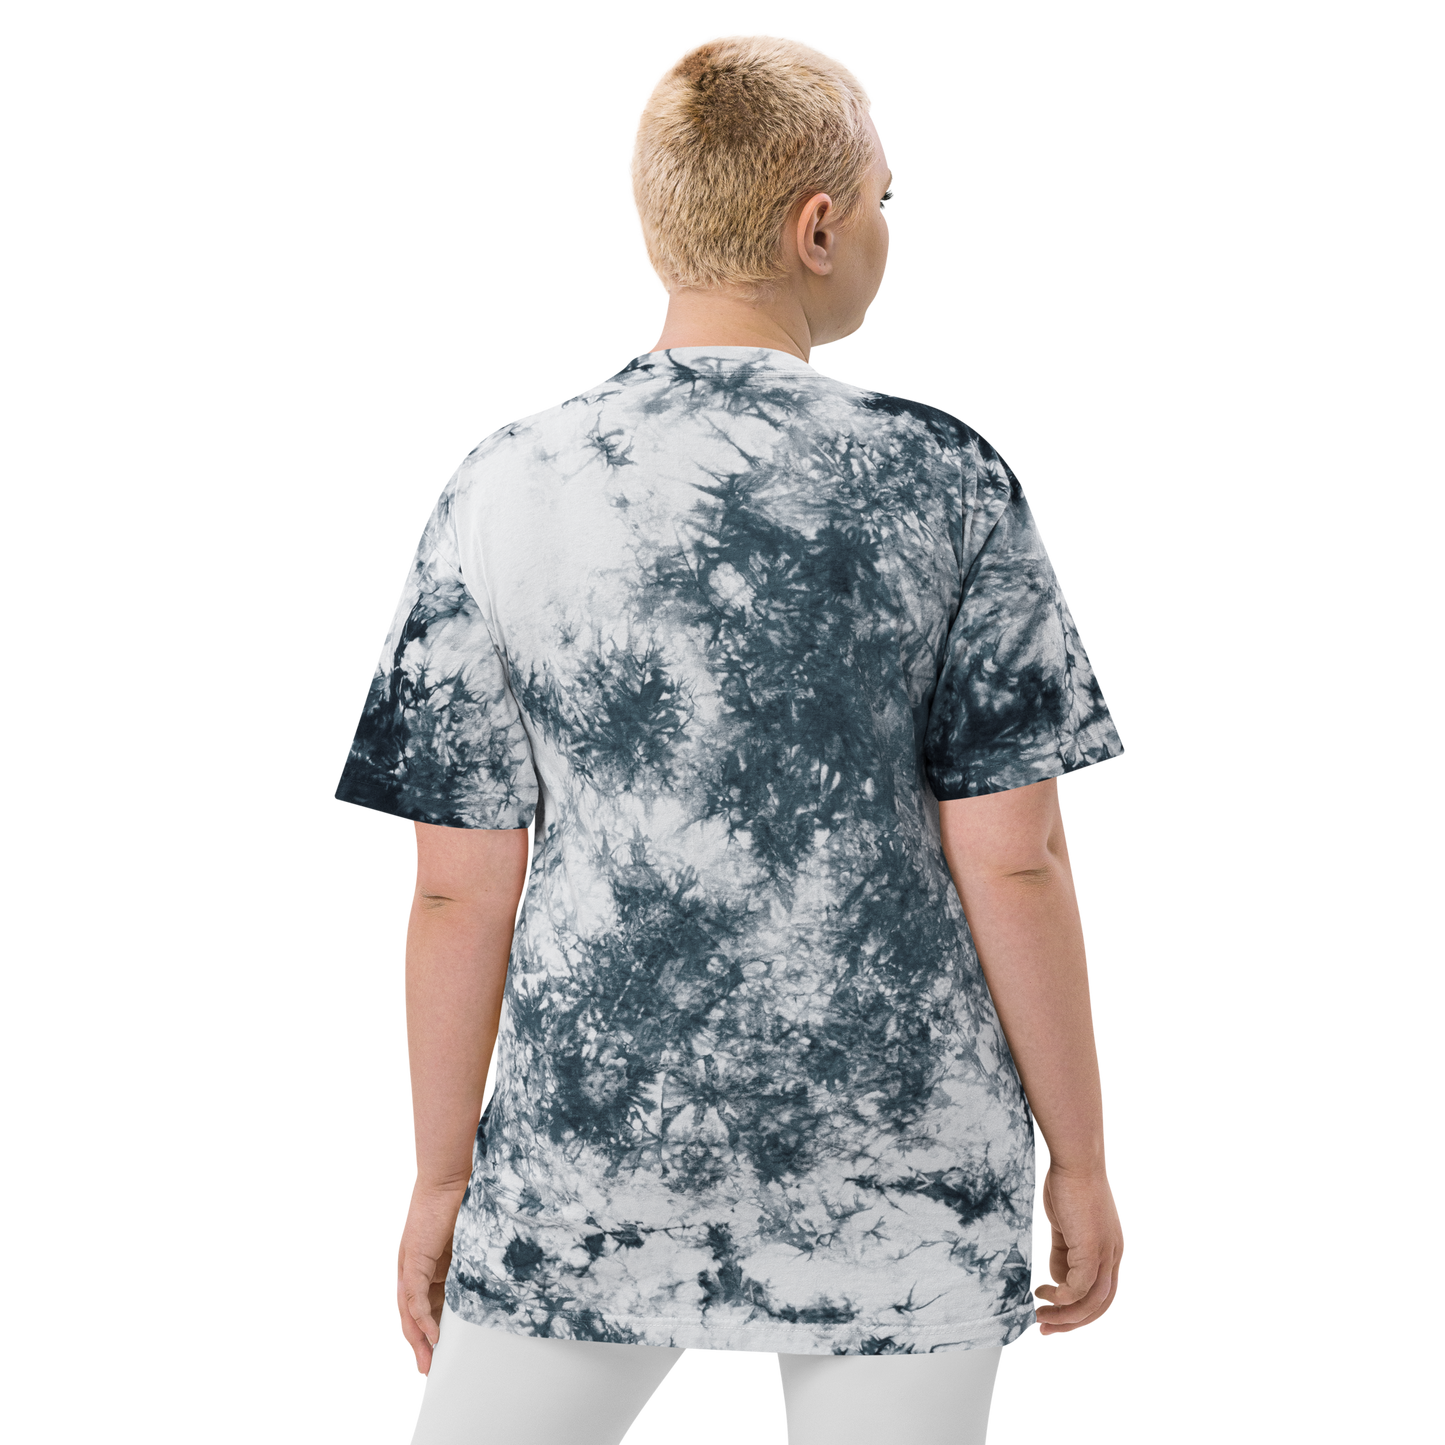 YHM Designs - YQT Thunder Bay Oversized Tie-Dye T-Shirt - Crossed-X Design with Airport Code and Vintage Propliner - White Embroidery - Image 17